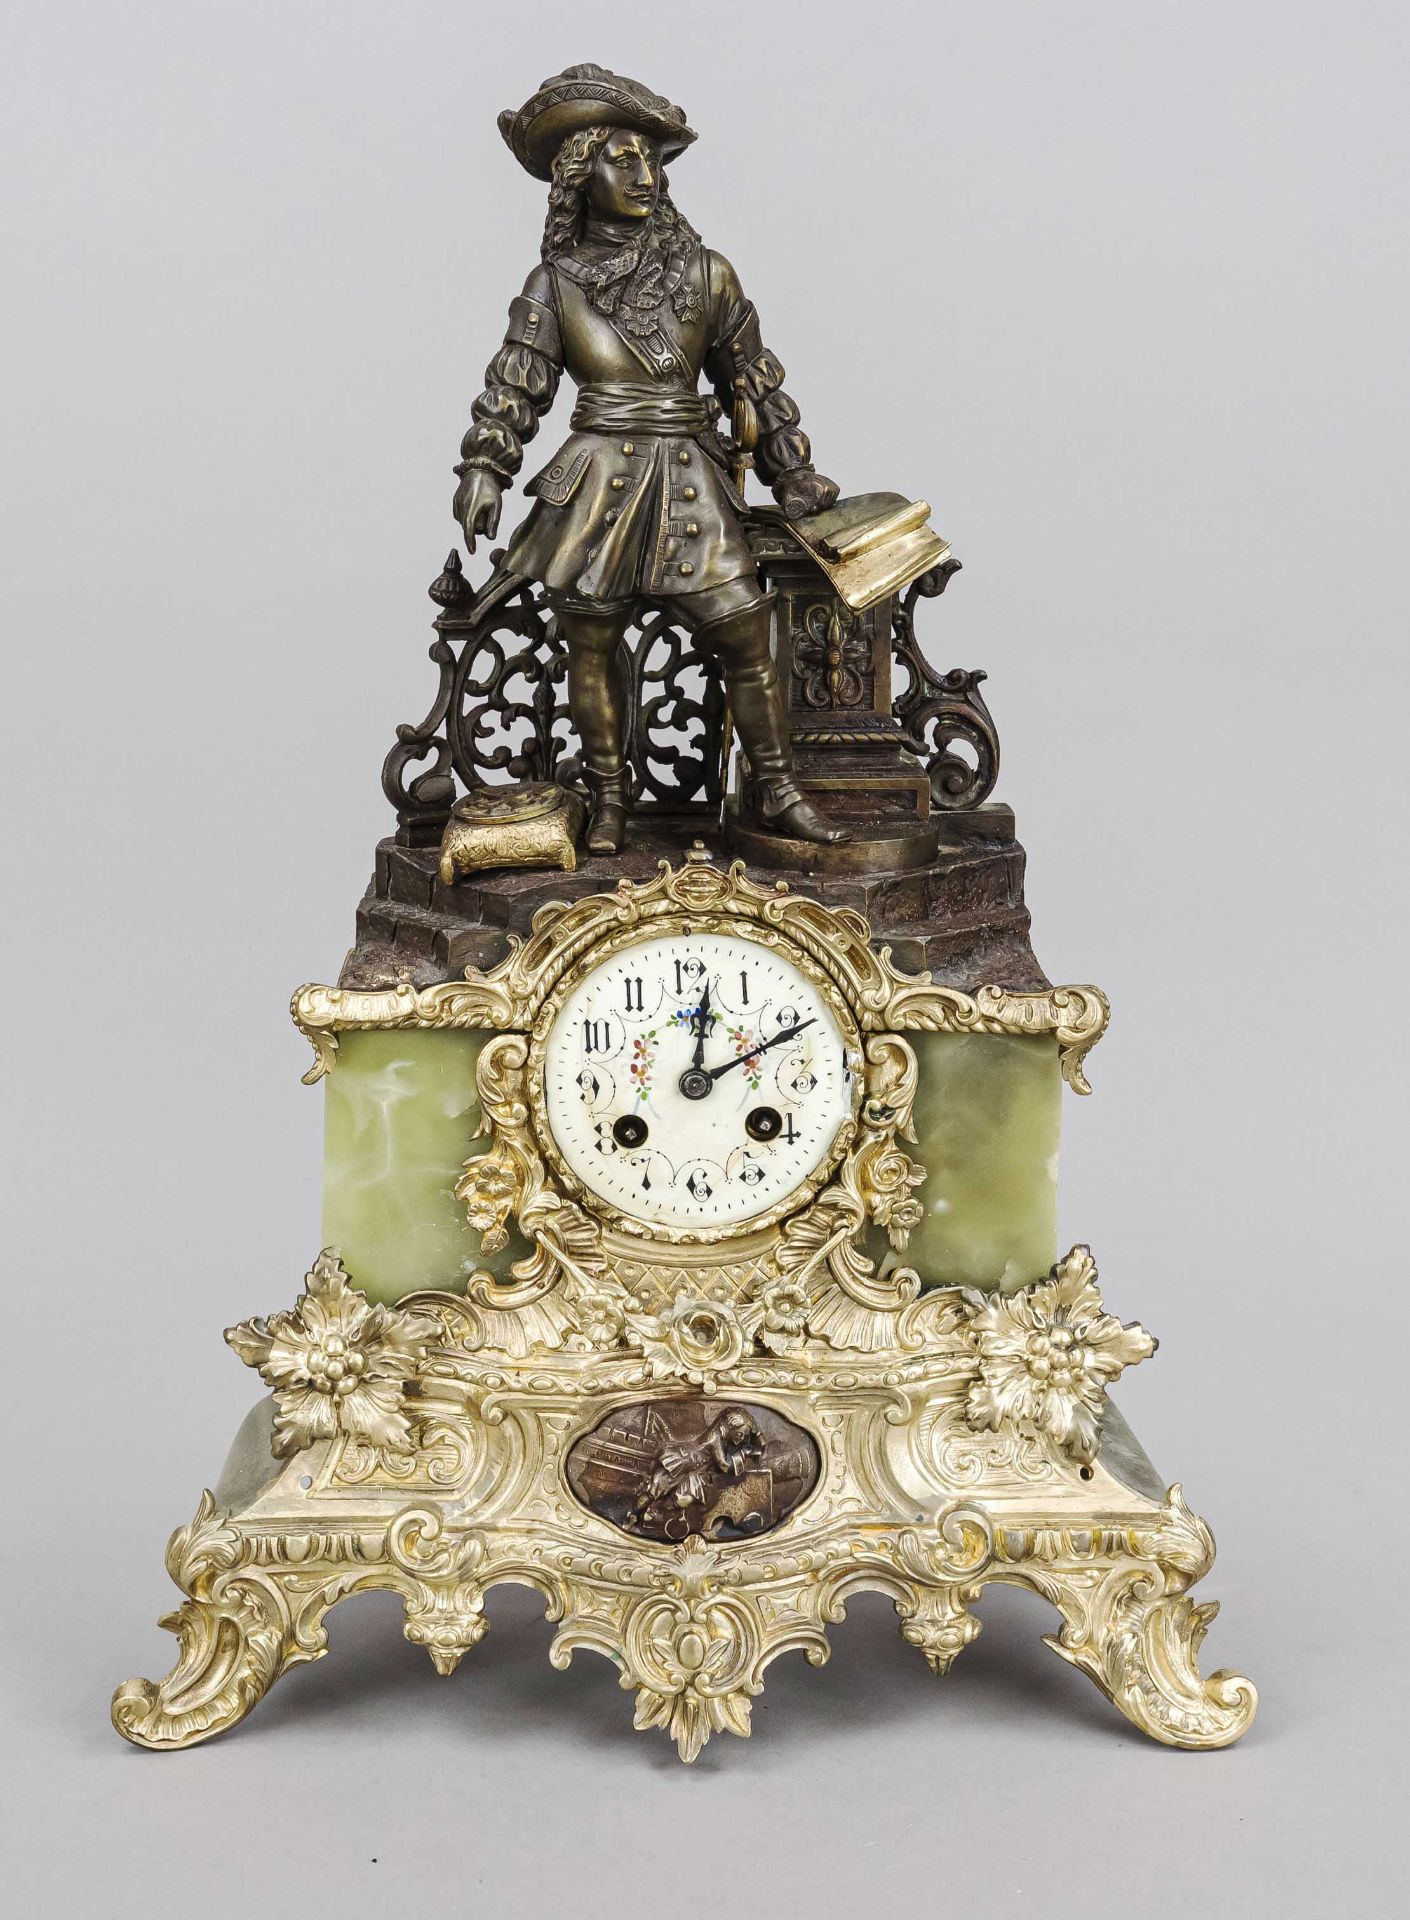 French, bronze figural pendulum, 2nd half 19th century, scholar with book leaning on railing,